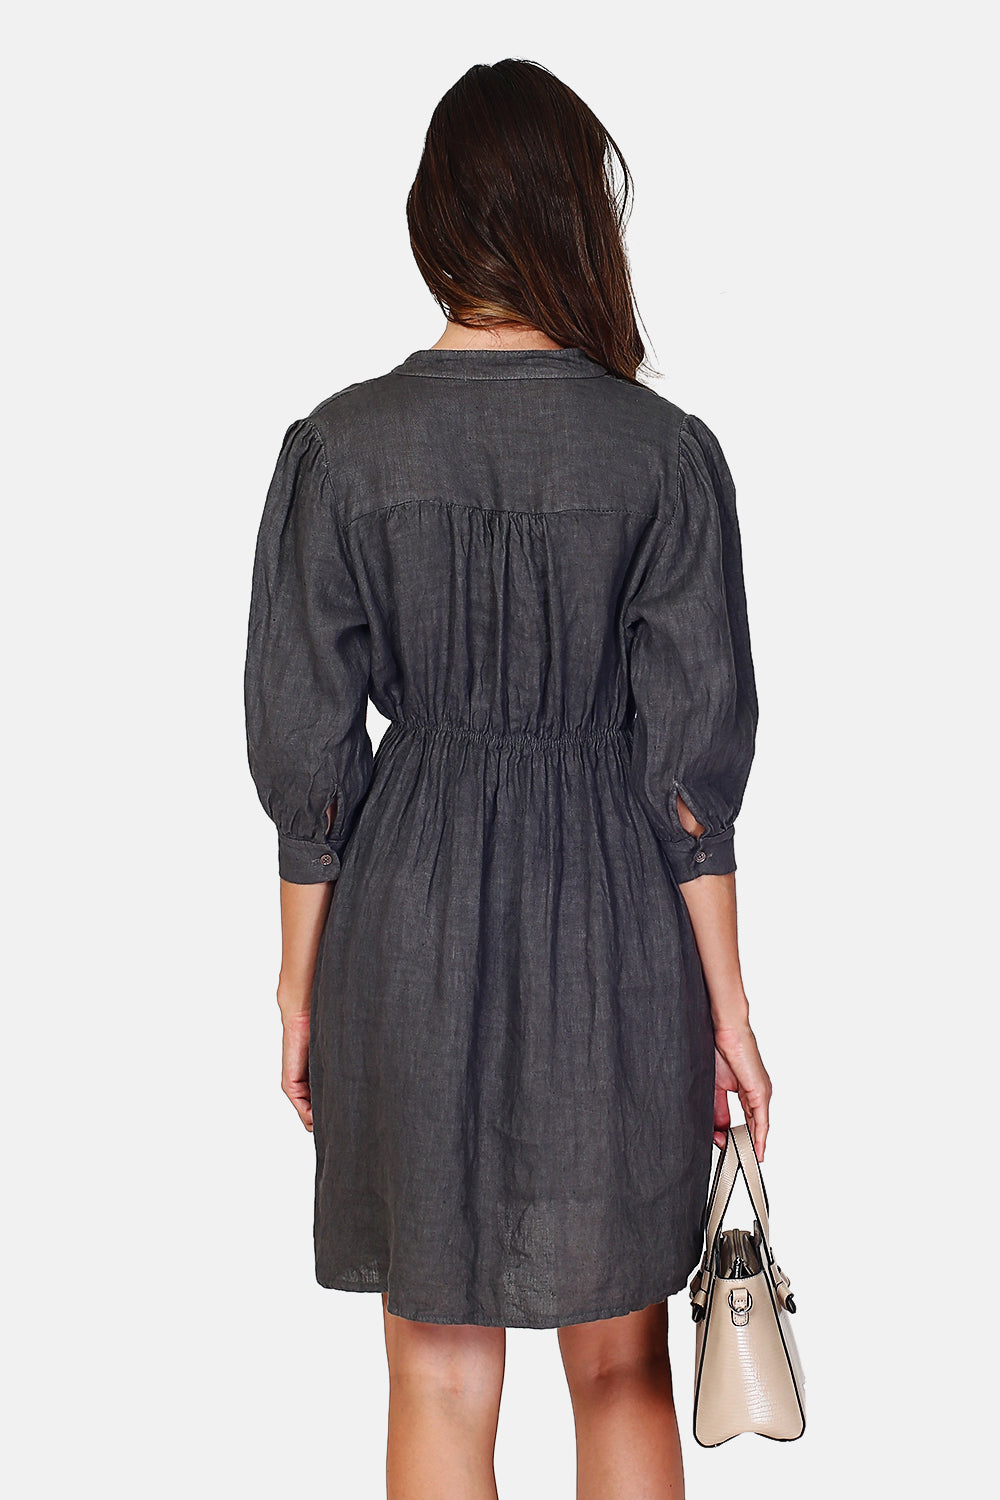 Mao collar dress buttoned in front of side pockets with babydoll maches